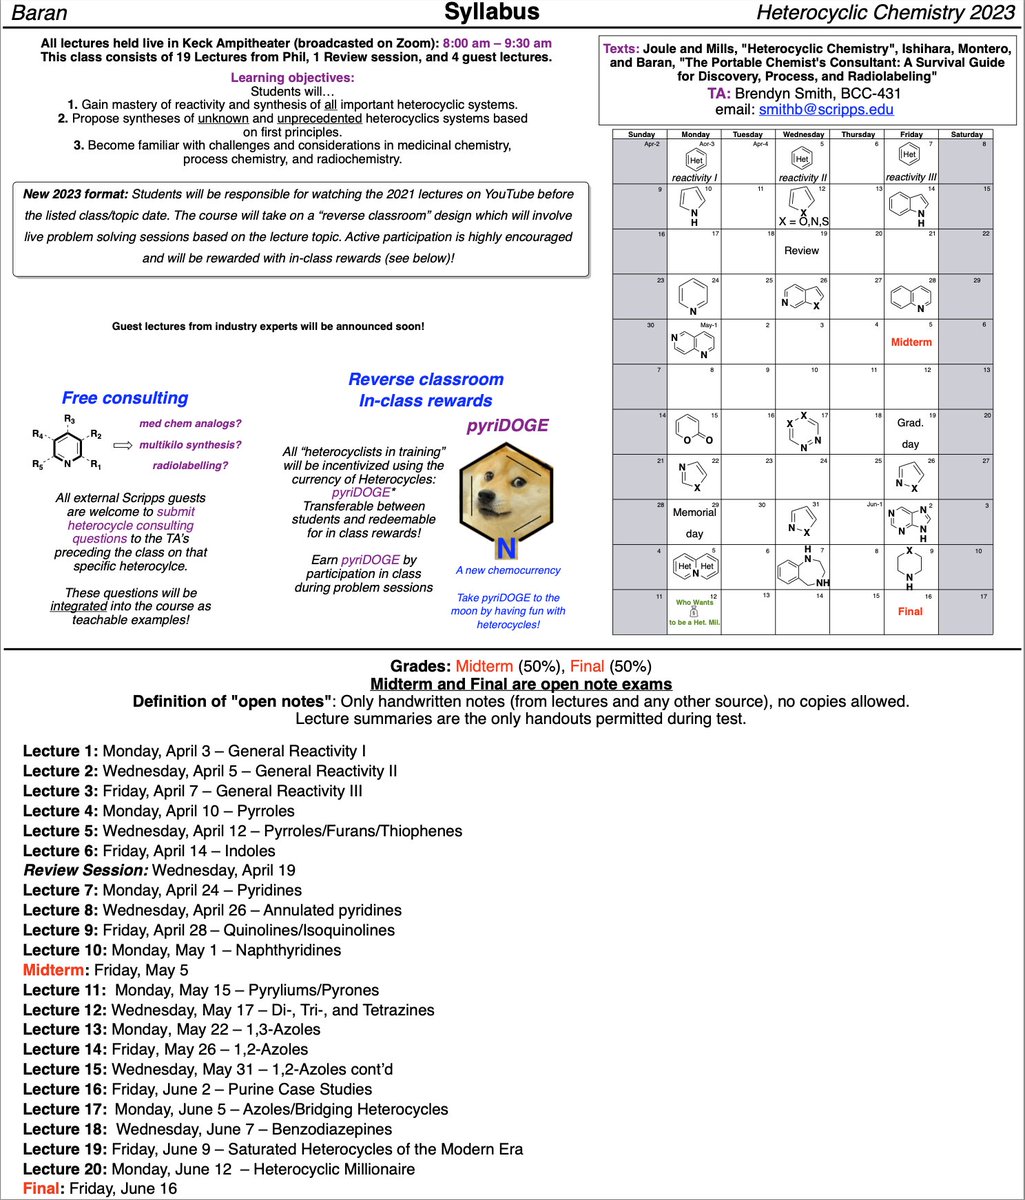 The 2023 edition of Heterocycles is coming on April 3 (see attached syllabus)! This year will be a reverse classroom format wherein new material will be discussed with problem solving sessions including real-world consulting questions. Please review the books.apple.com/us/book/the-po…